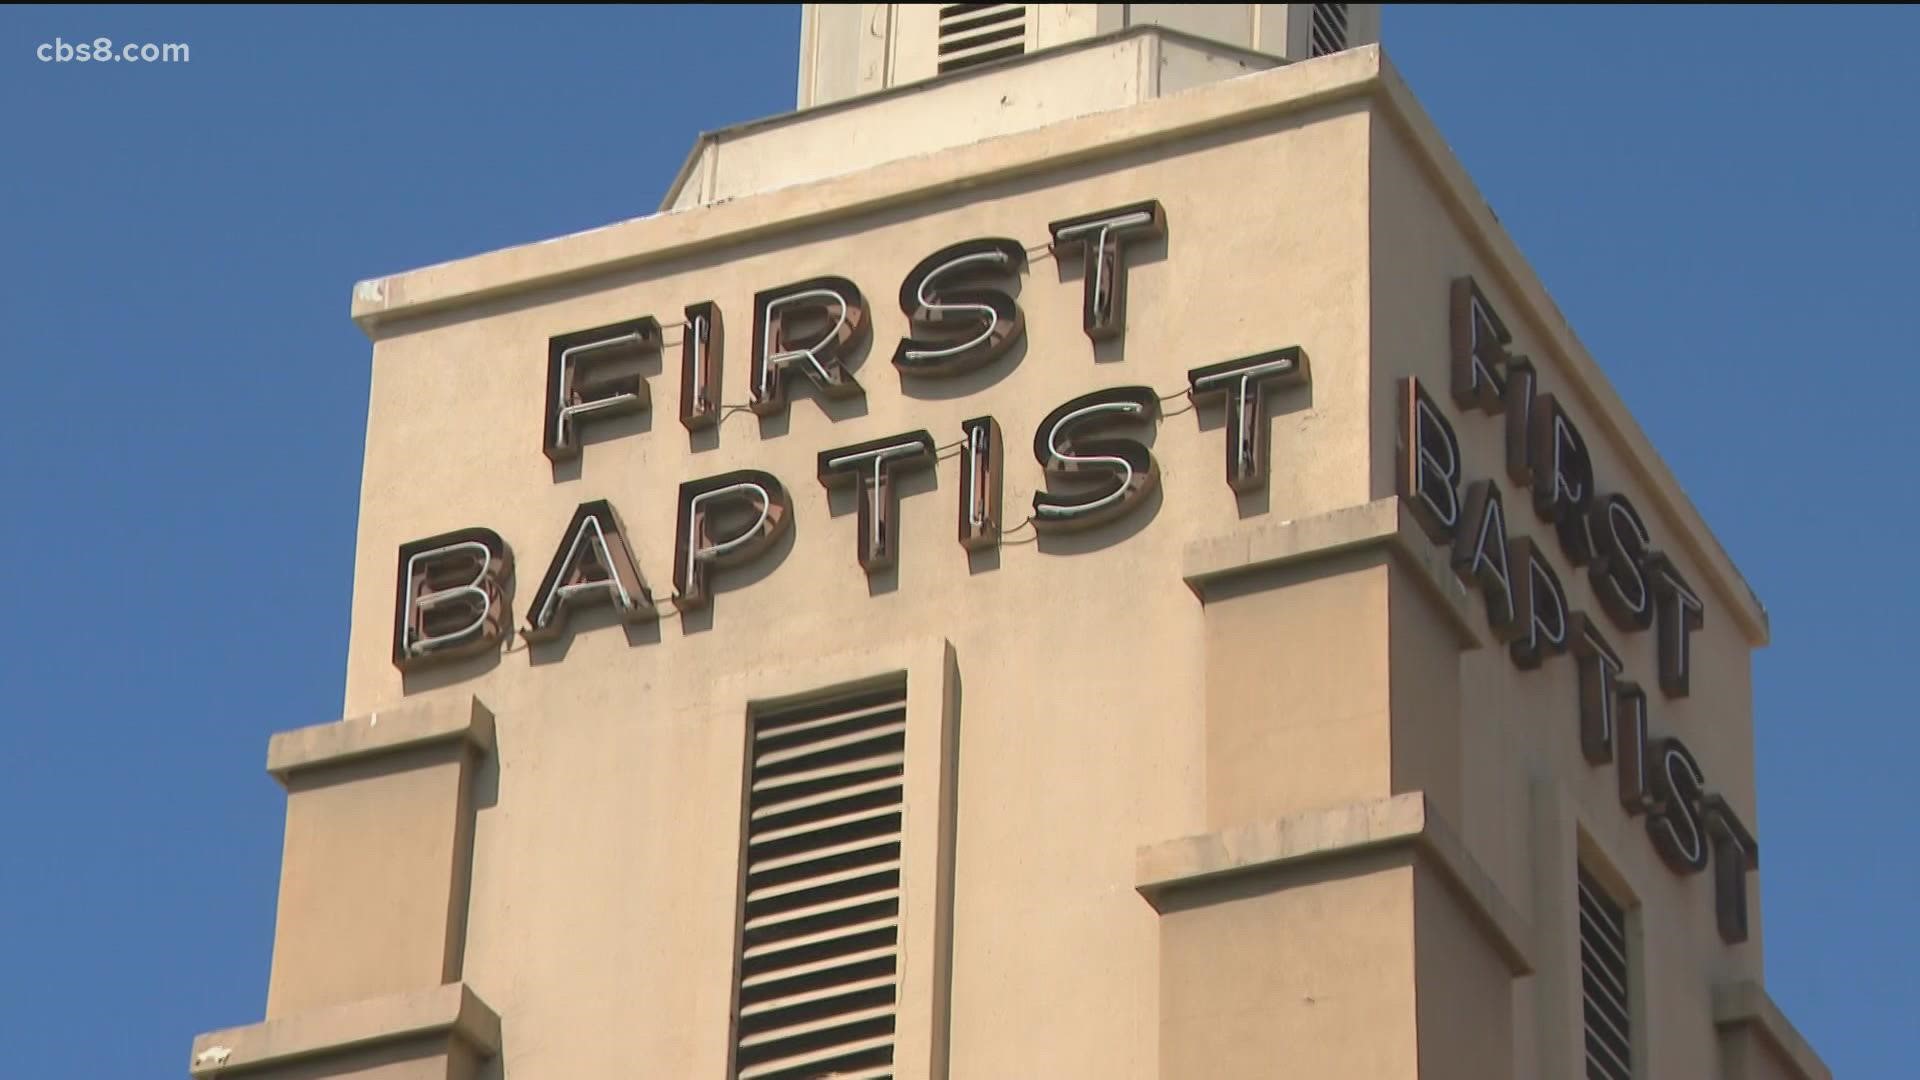 The damage was all done by two people, a man and a woman, who squatted at the First Baptist Church of El Cajon for several months.